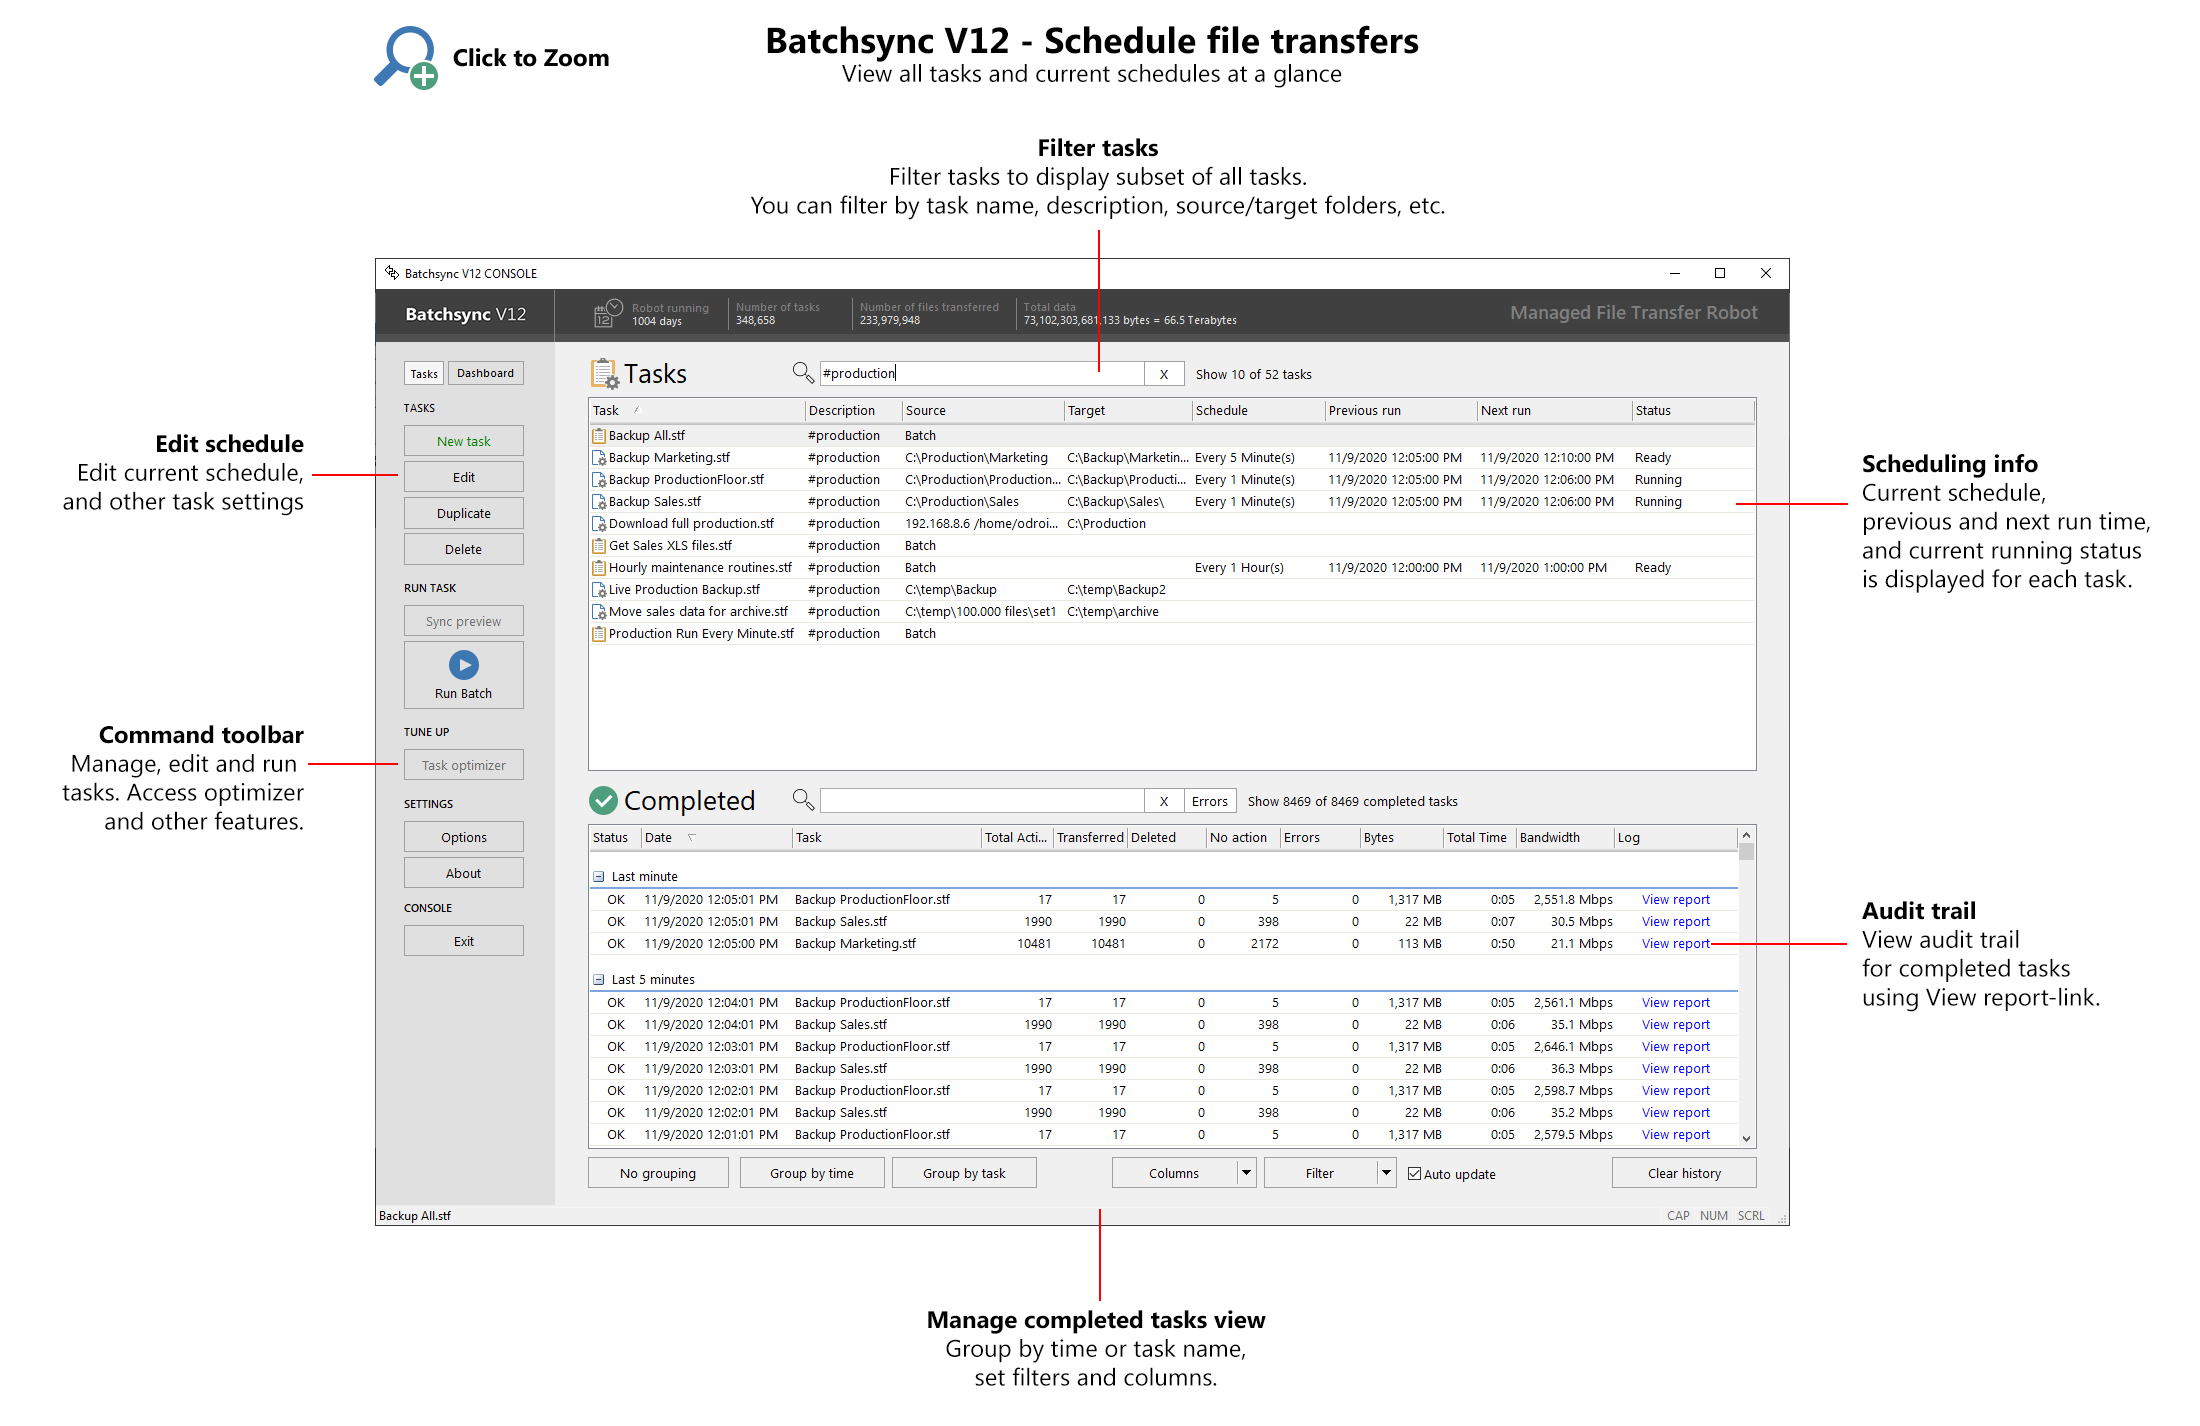 Click to Zoom: Schedule file transfers